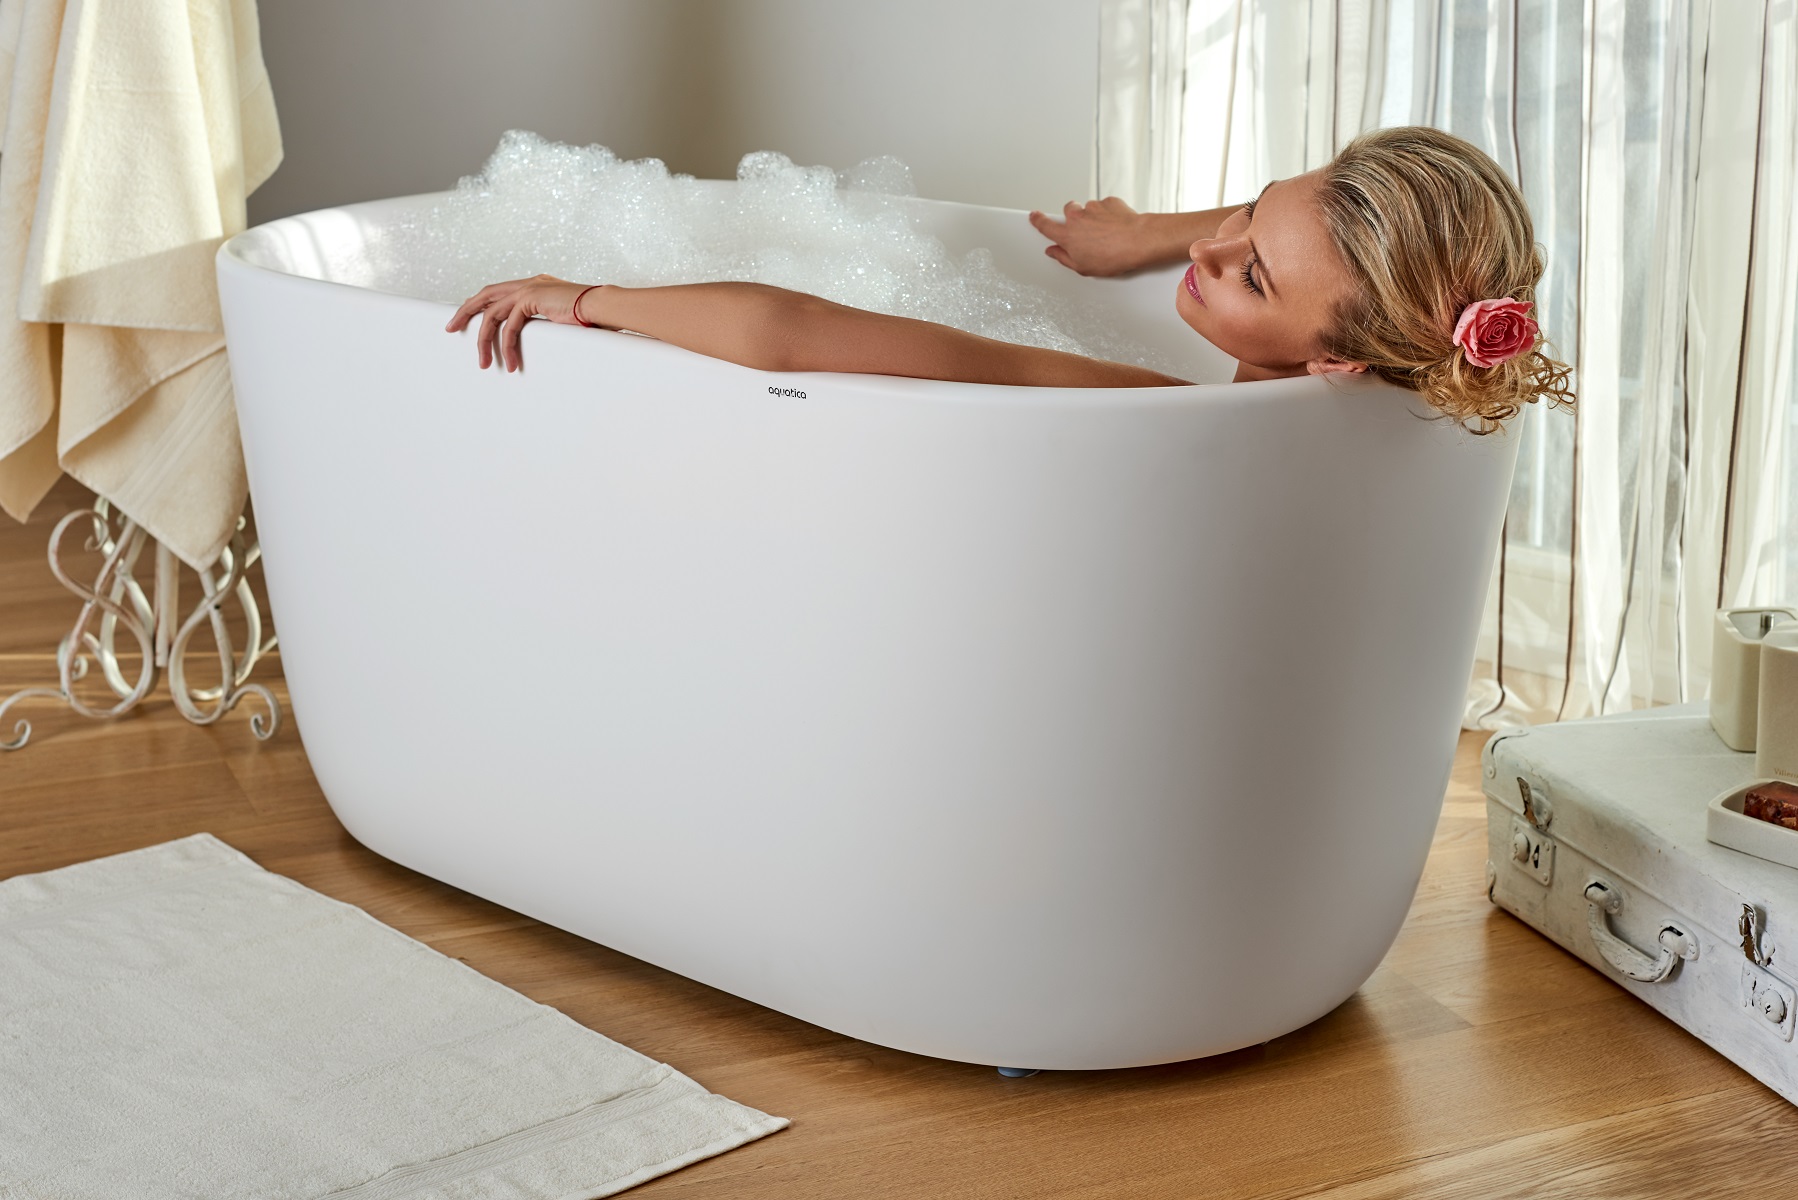 Lullaby Wht Freestanding Solid Surface Bathtub web (8)